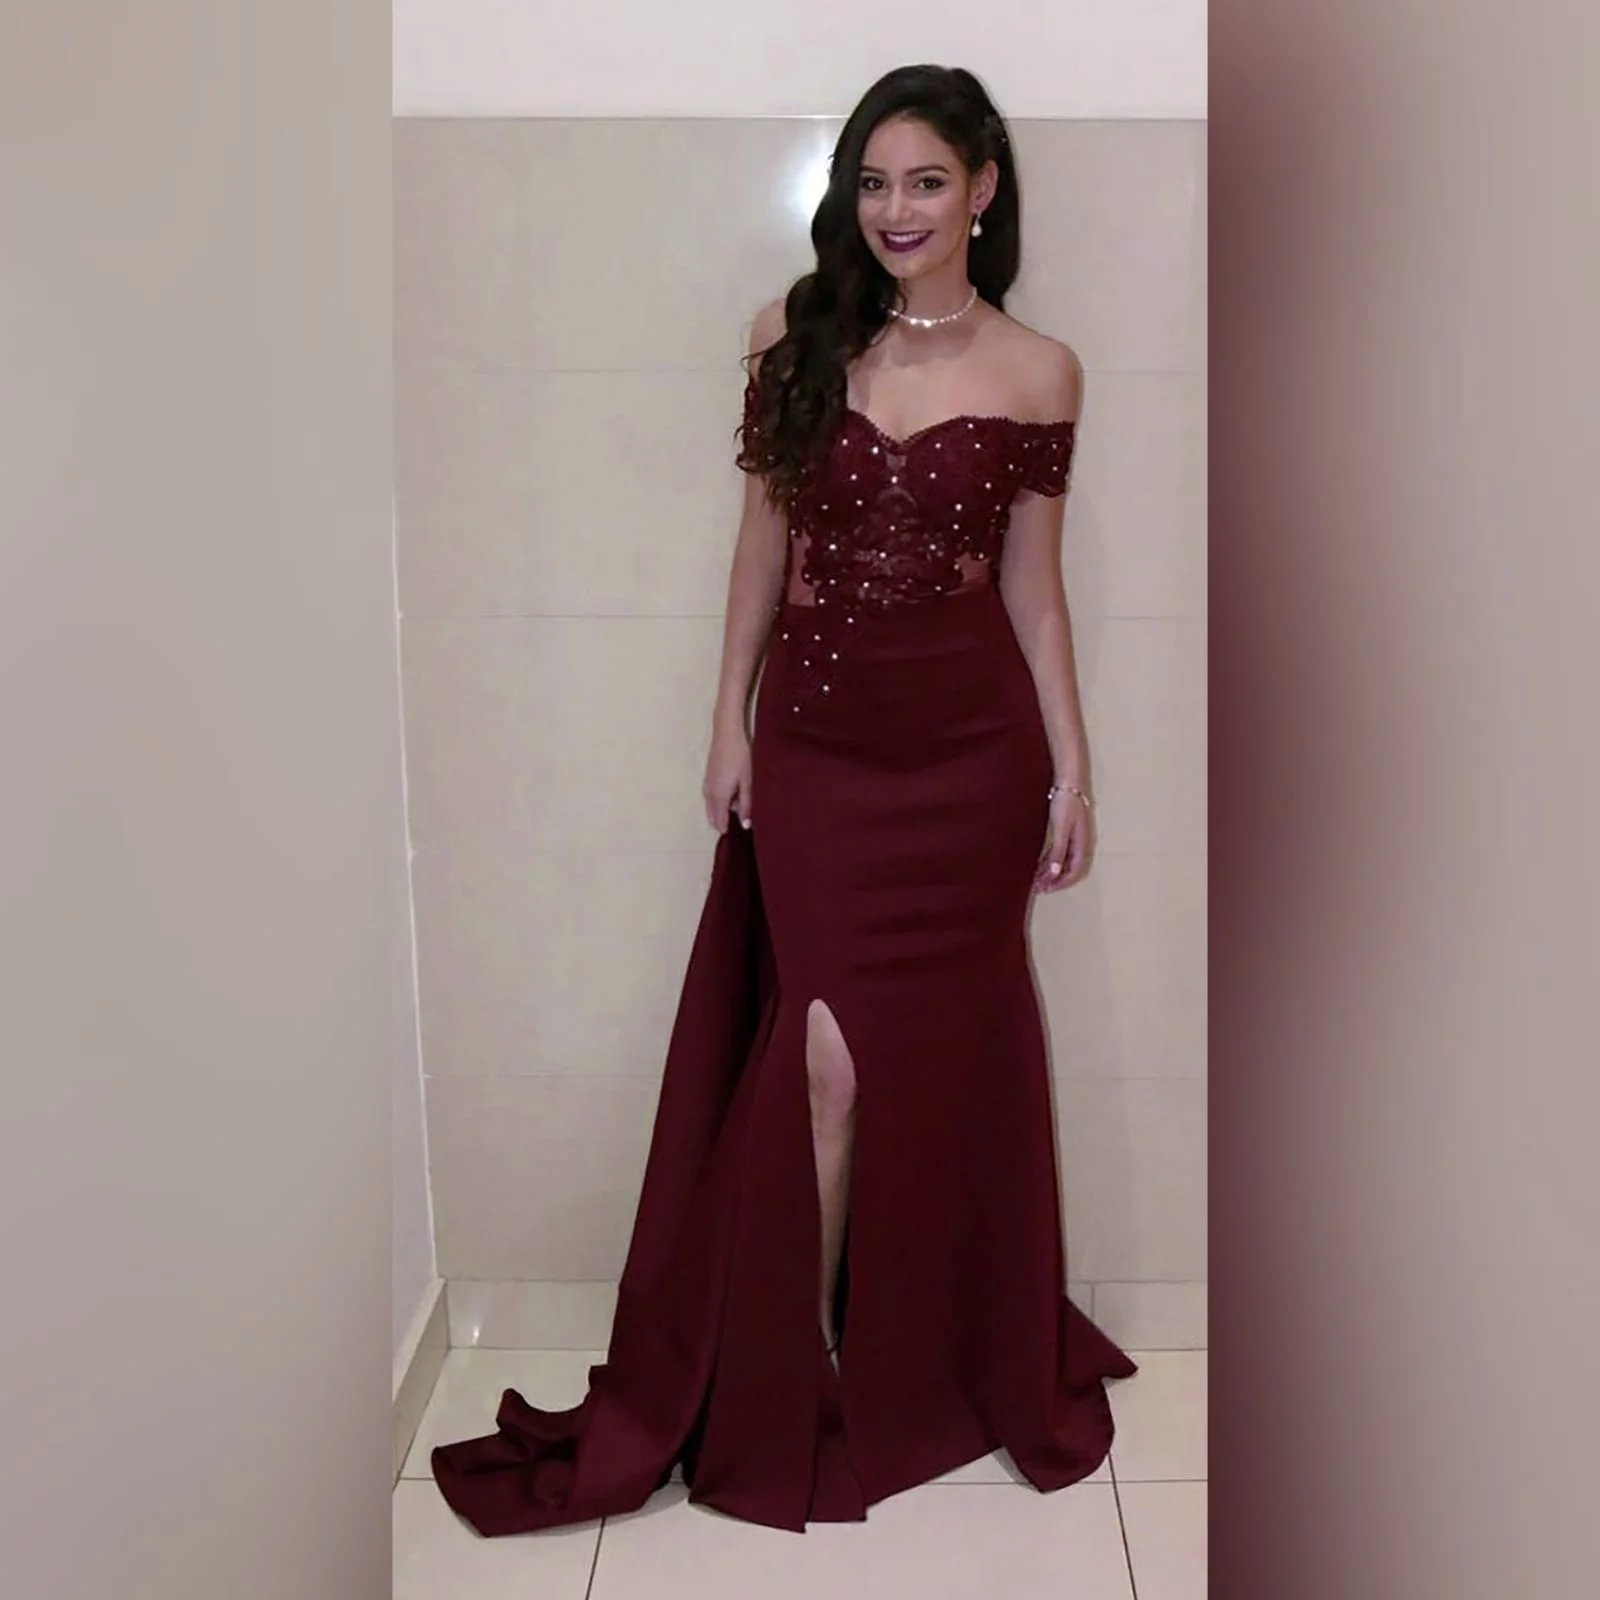 Burgundy off shoulder long matric dance dress 8 burgundy off shoulder long matric dance dress. With an illusion bodice detailed with lace and beads and off-shoulder short sleeves. Bottom fitted till hip, with a high slit and a train for a touch of sexy and drama.